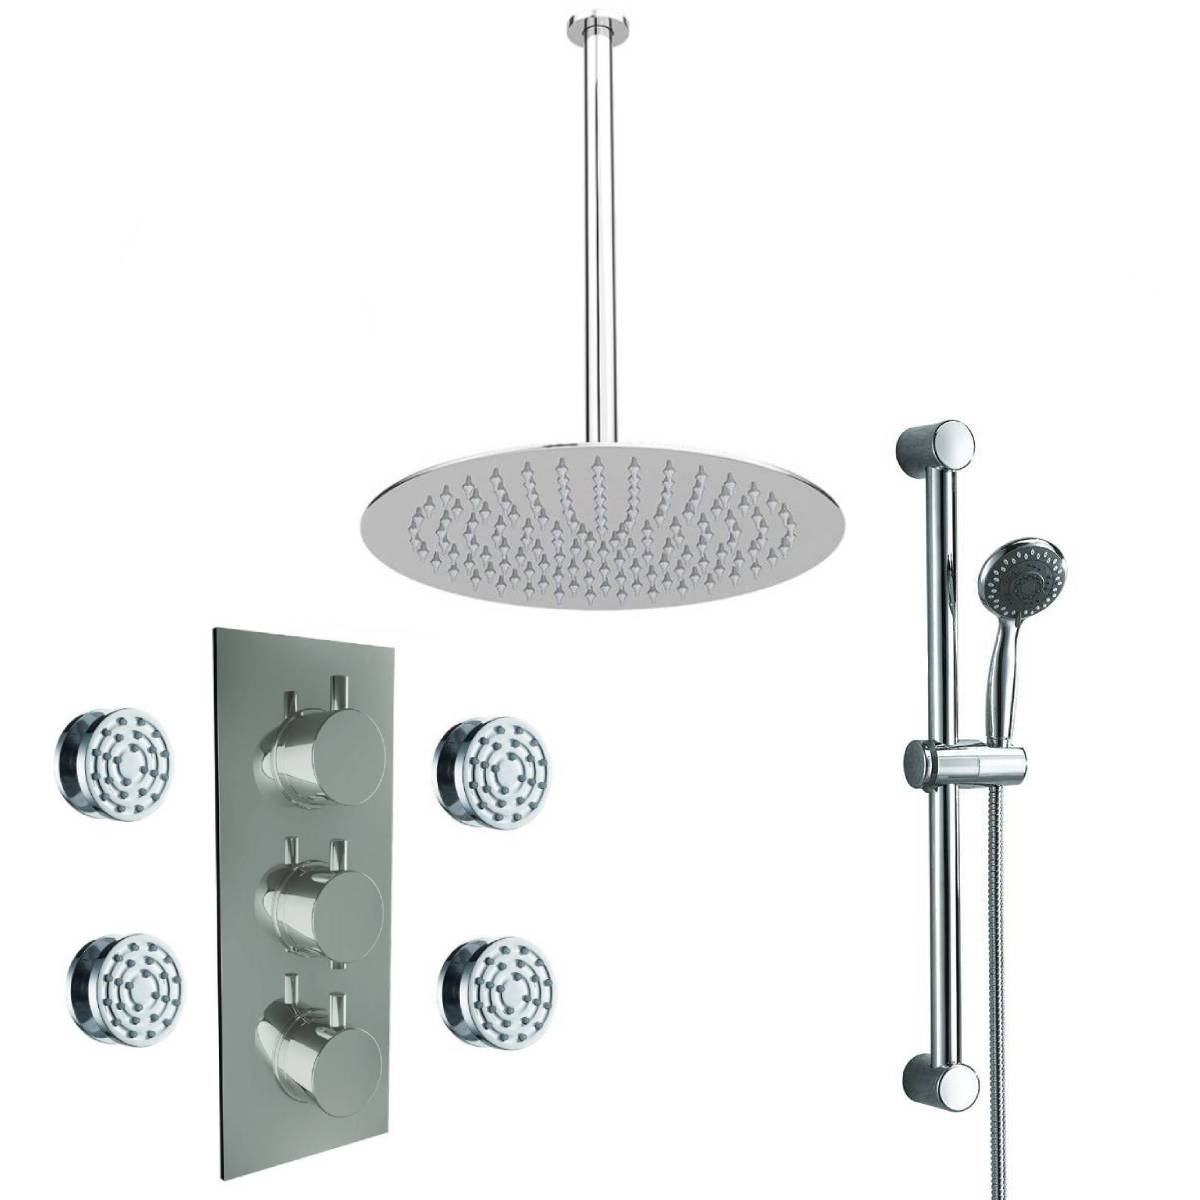 Round Triple Thermostatic Concealed Mixer Shower Kit with Ceiling Mounted 200mm Shower Head, Slide Rail Kit & Body Jets (12491)